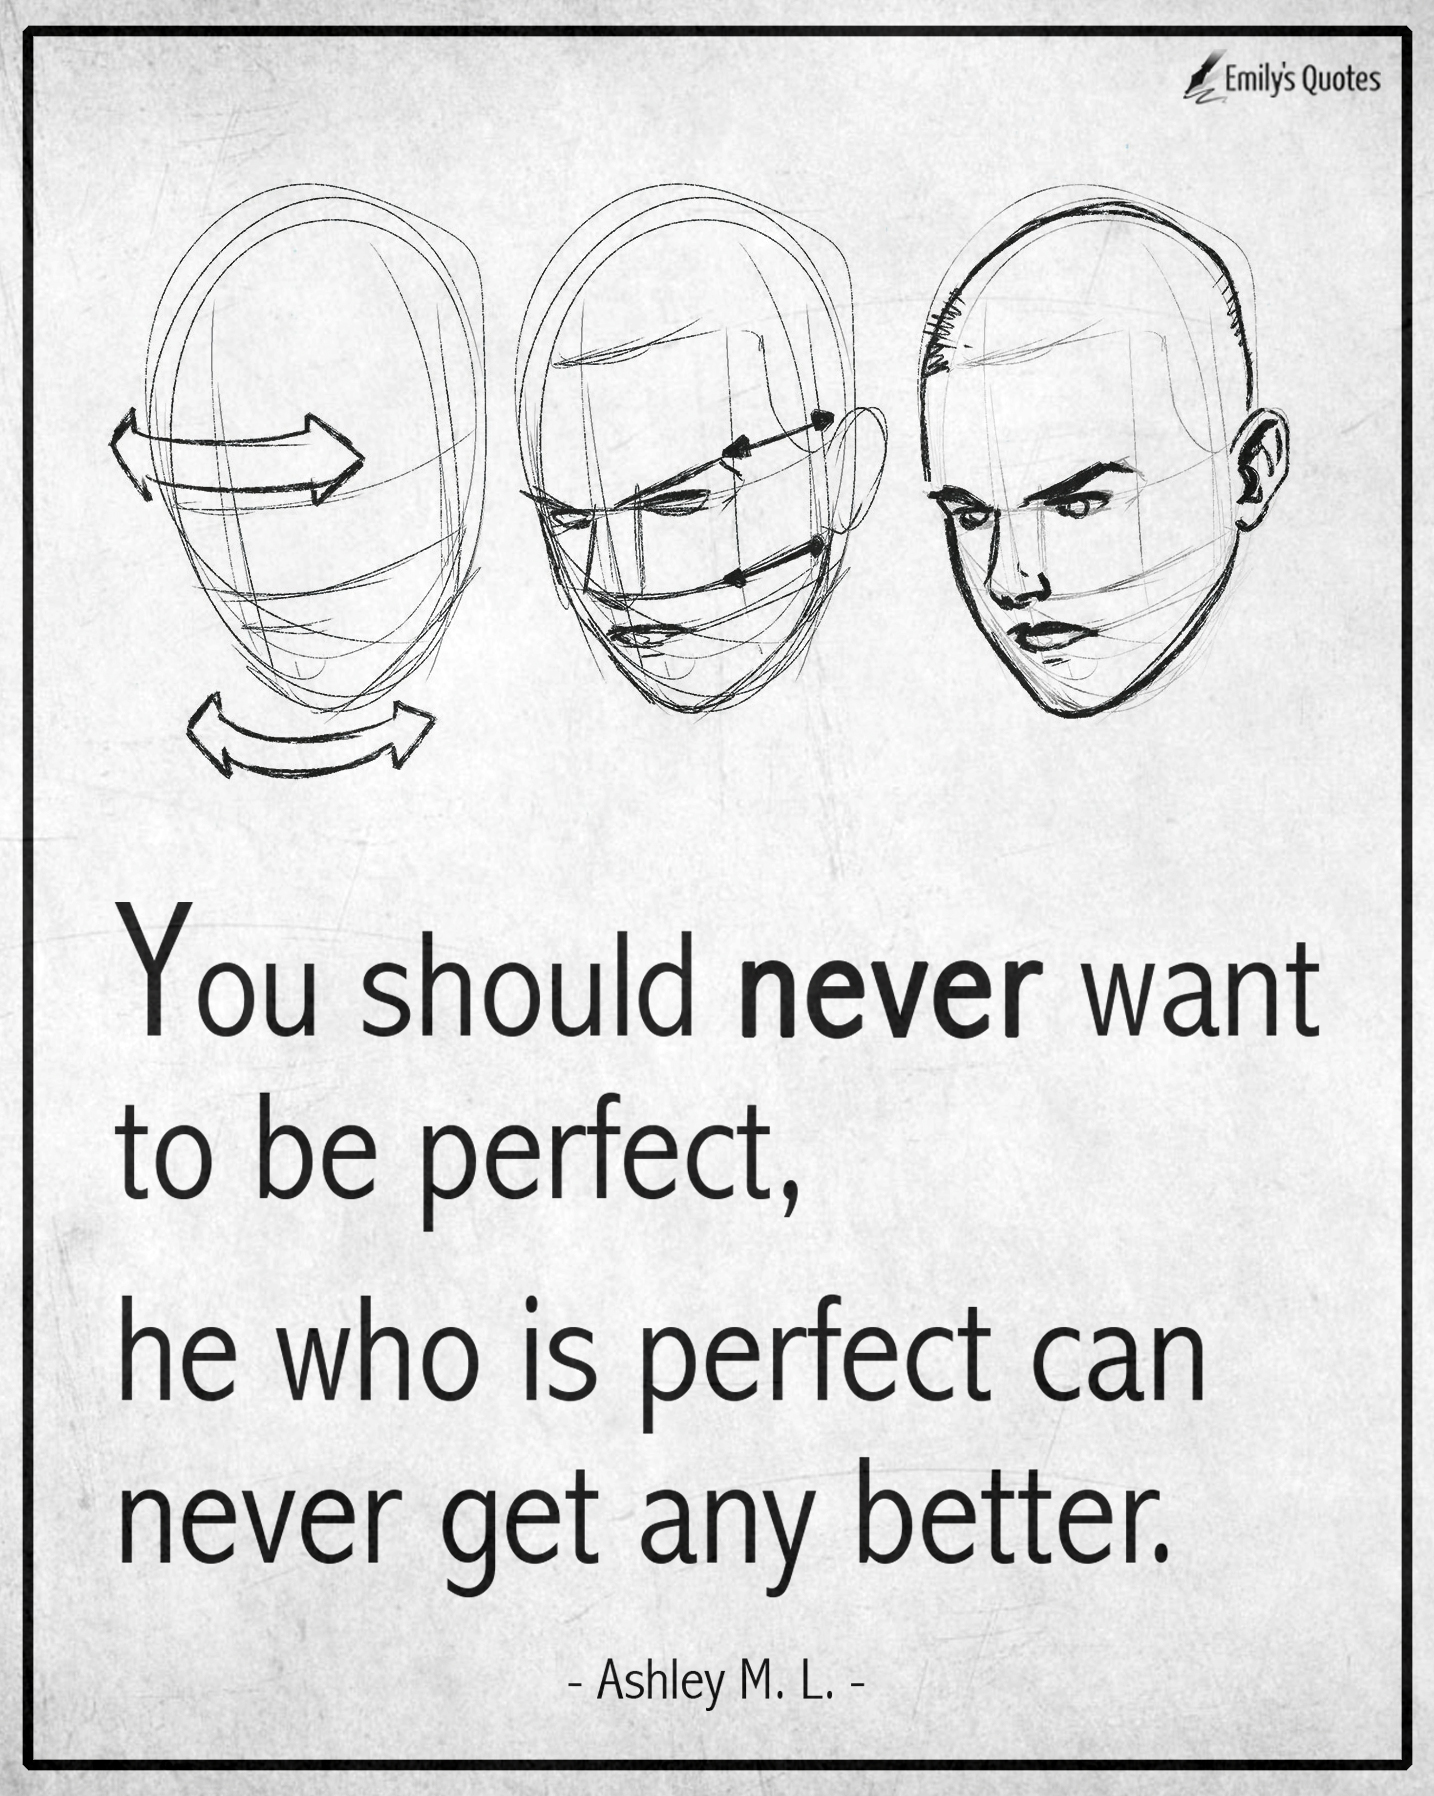 You should never want to be perfect, he who is perfect can never get any better